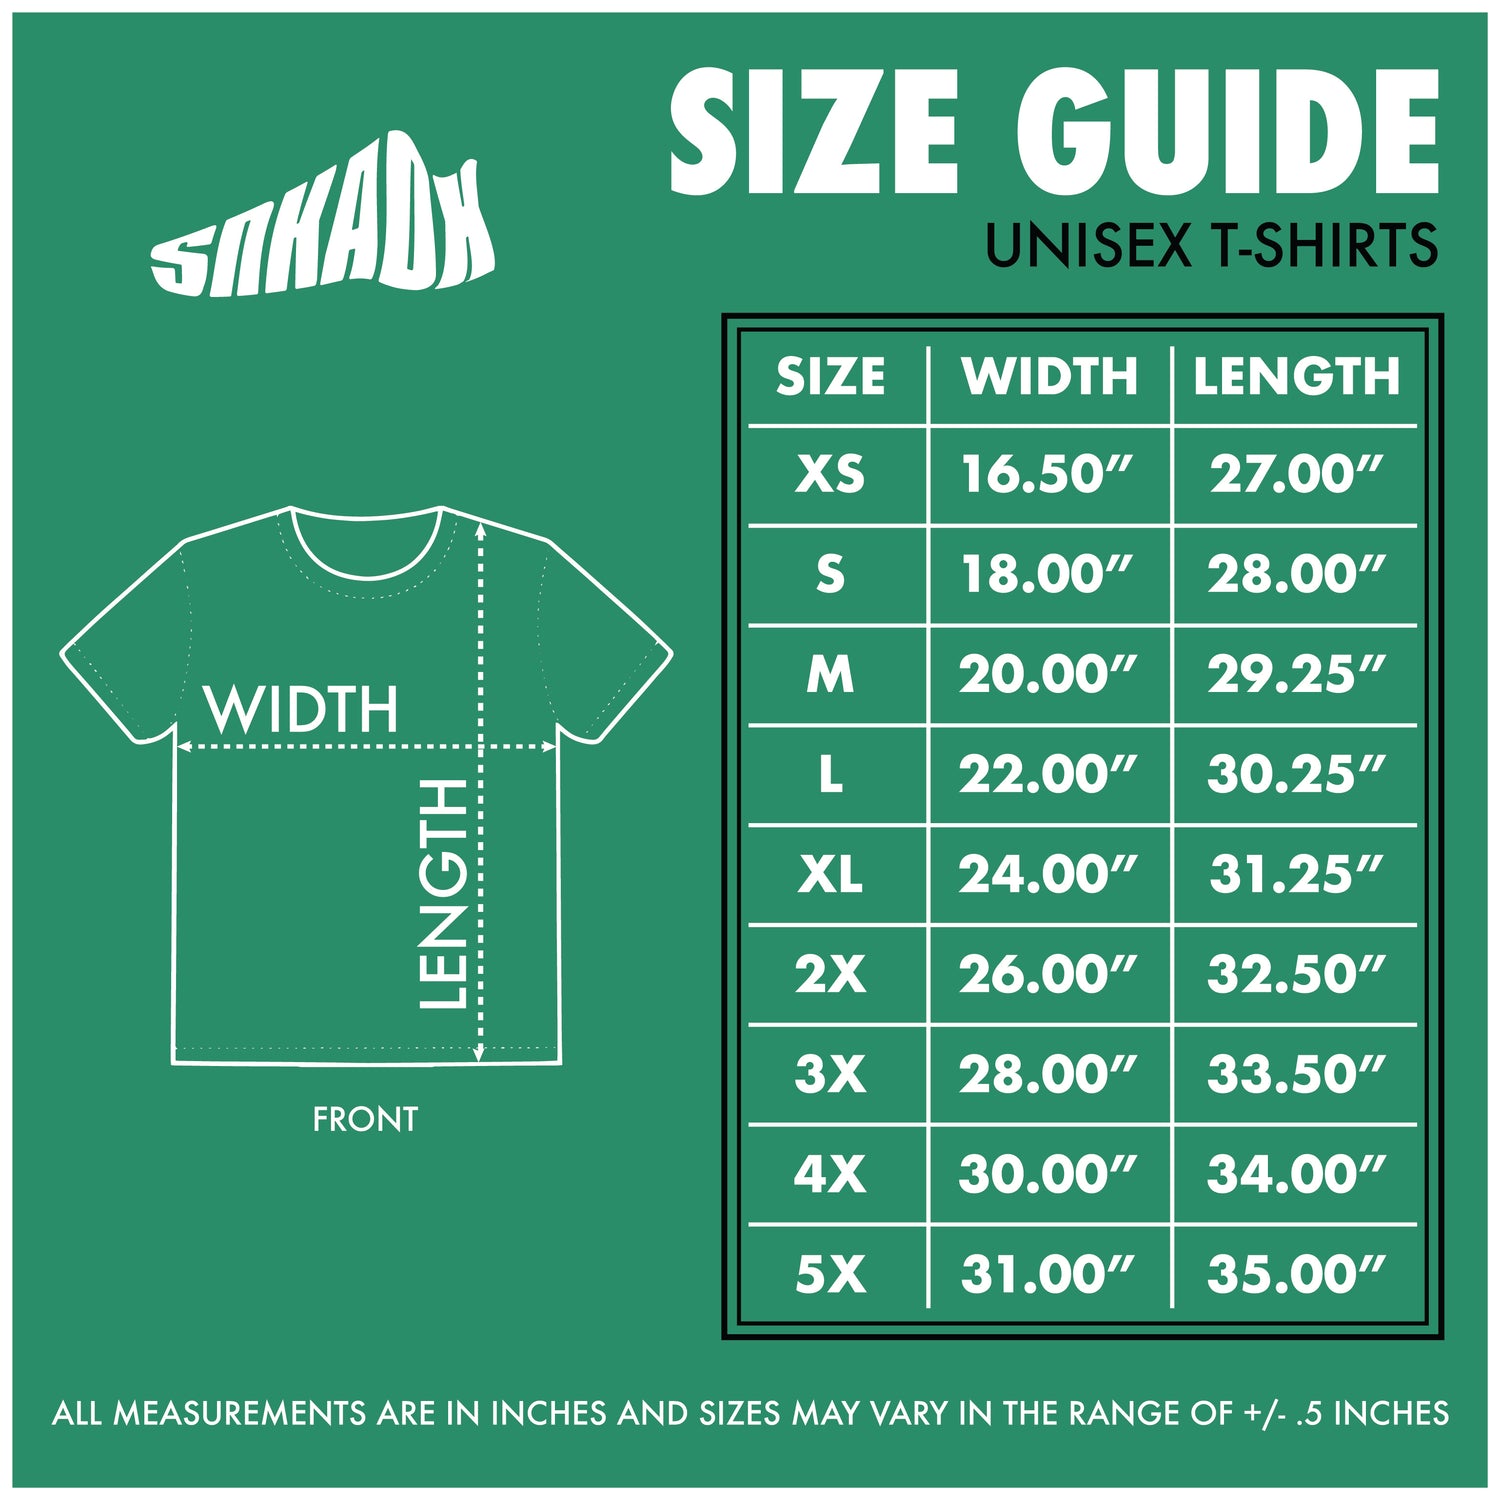 An adult t-shirt made of soft cotton fabric, available in various colors and sizes. The shirt features short sleeves, a crewneck collar, and a relaxed fit for comfortable wear. The design may include graphics, patterns, or text, suitable for different styles and preferences. Ideal for casual occasions, sports activities, or as a layering piece.